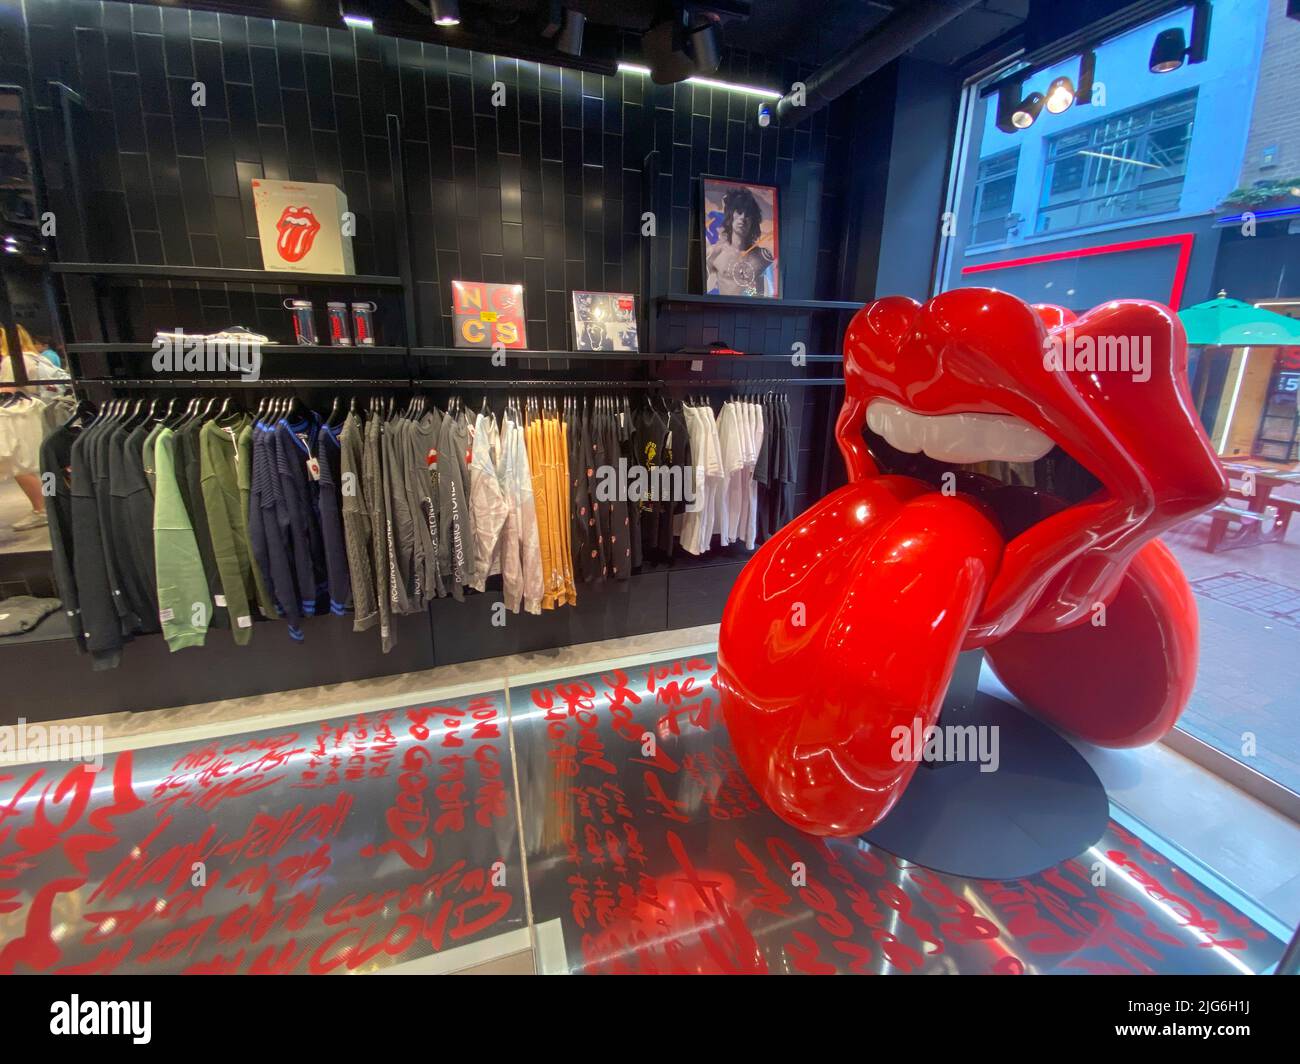 THE ROLLING STONES UK CARNABY ST. CONSERVARE Foto Stock